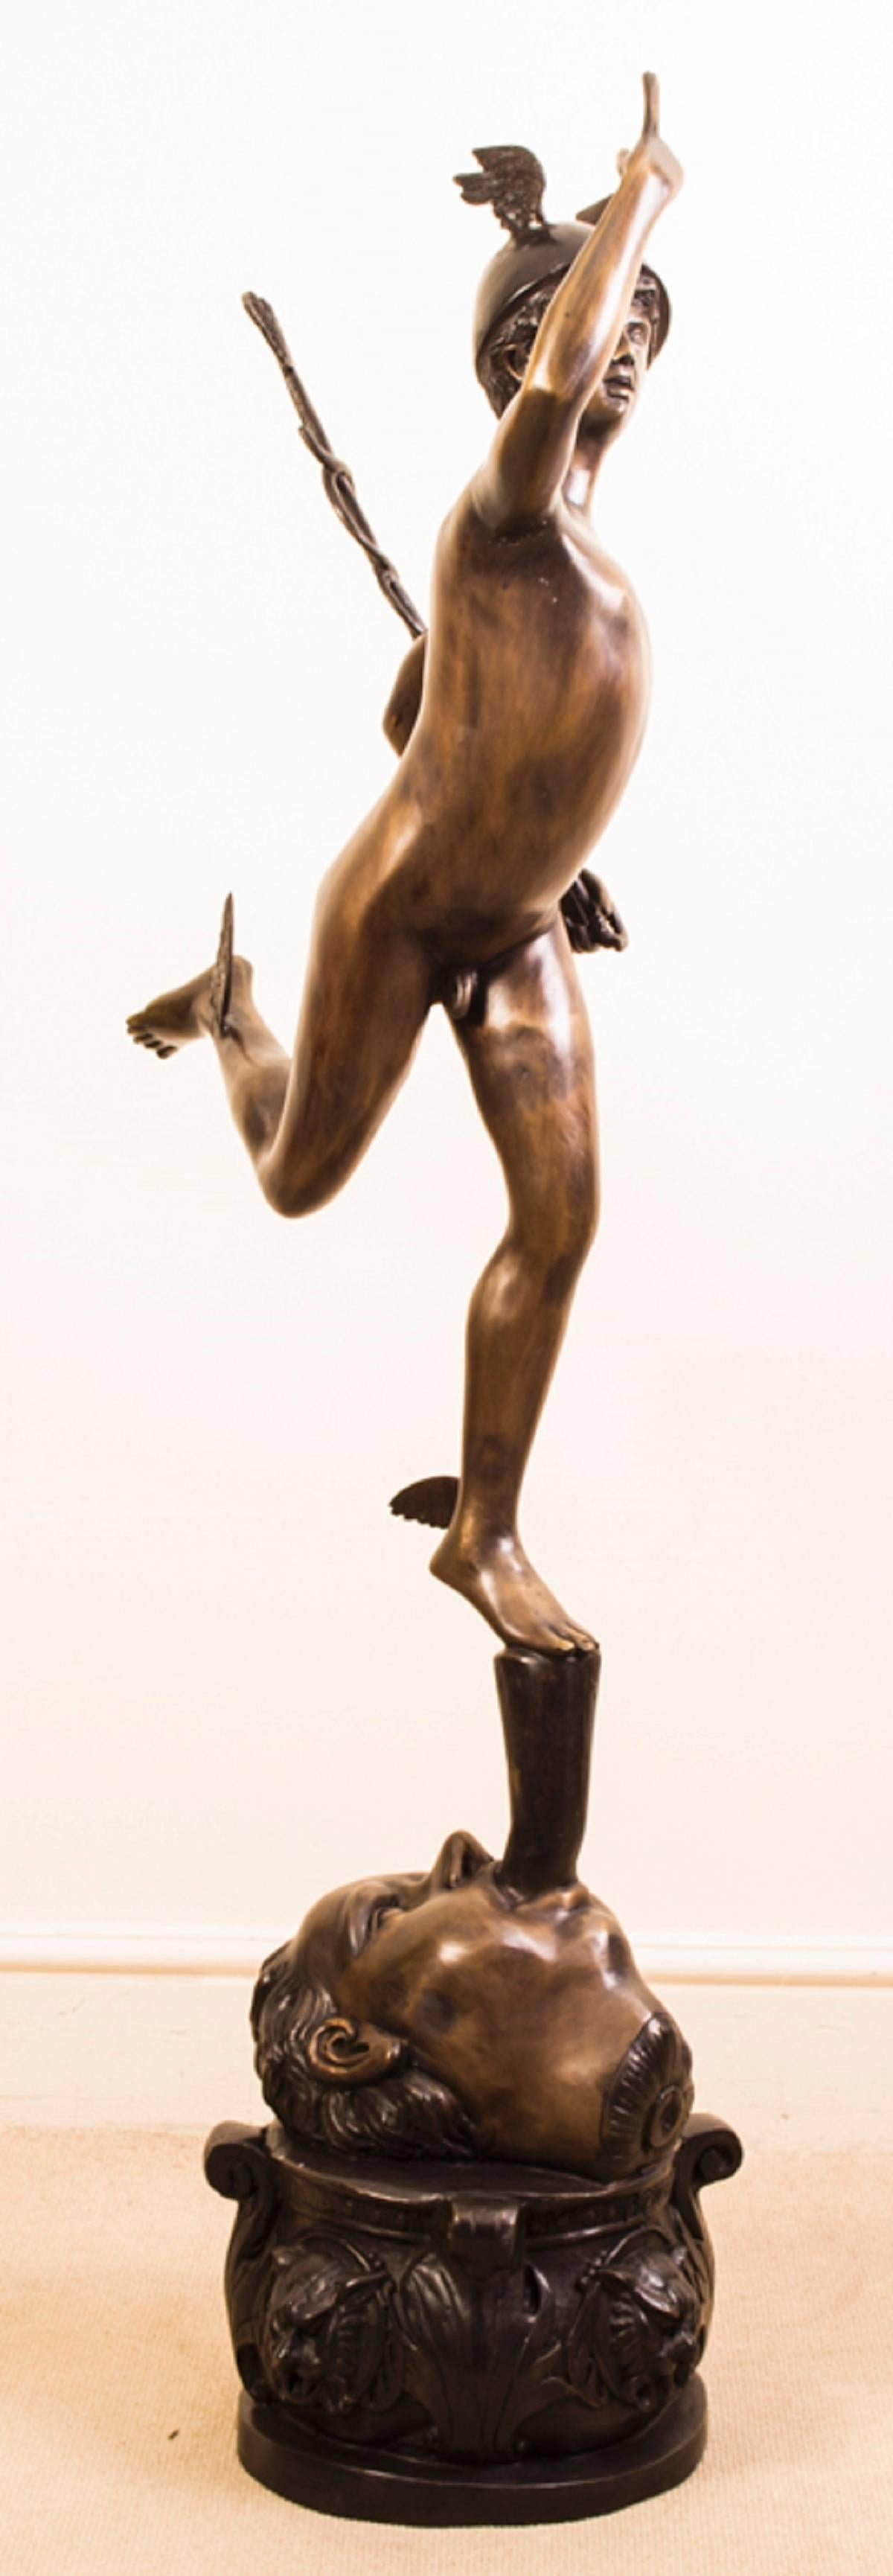 This is a gorgeous solid bronze statue of Mercury, also known as Hermes, dating from the last quarter of the 20th century. 

This high quality hot cast solid bronze was produced using the traditional 'lost wax' process. The bronze rests on marble